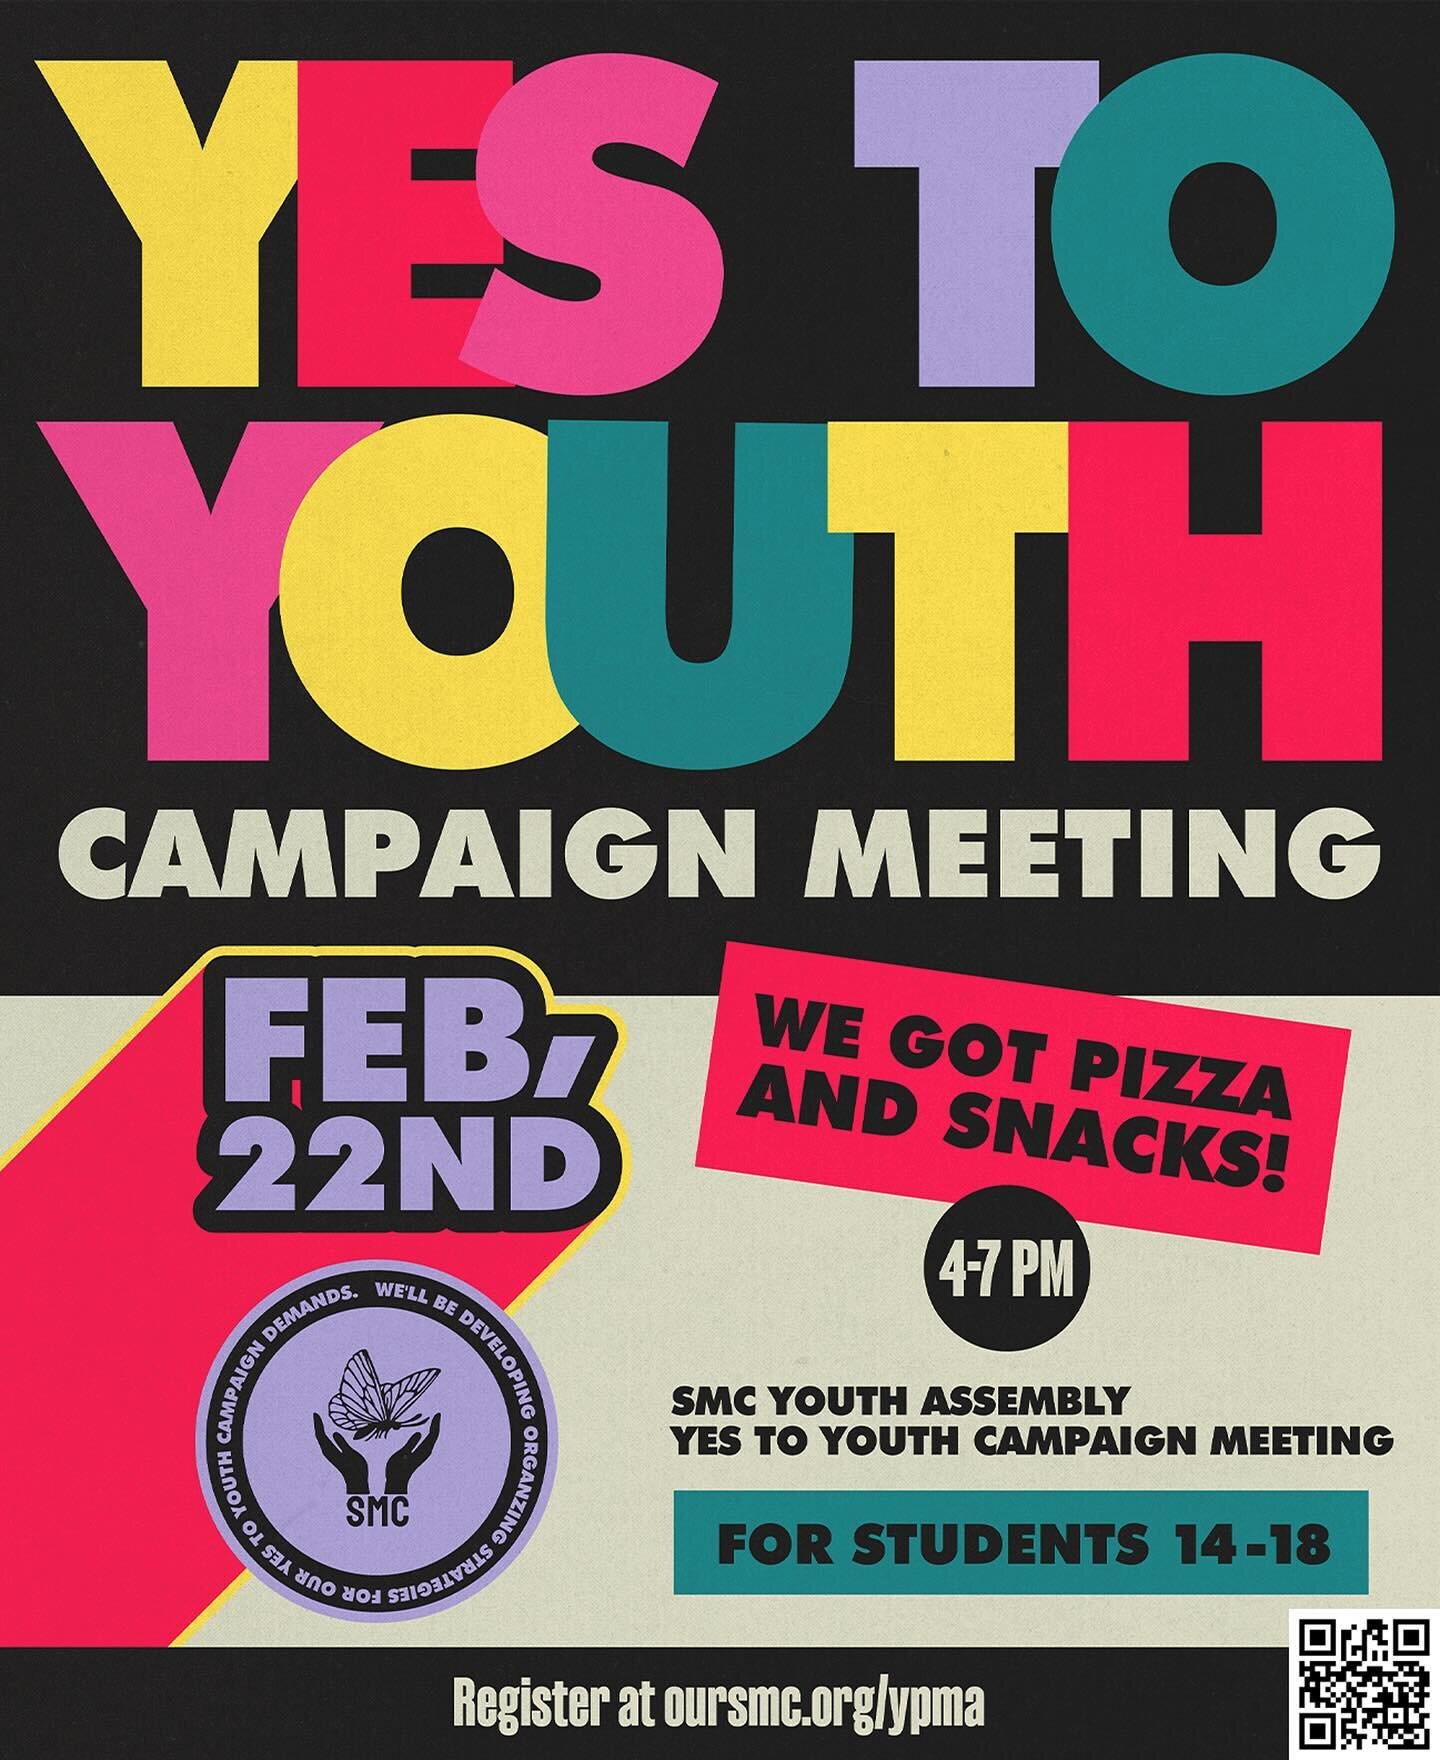 Make sure you RSVP so we can get a count, see yal next Thursday! Oursmc.org/ypma